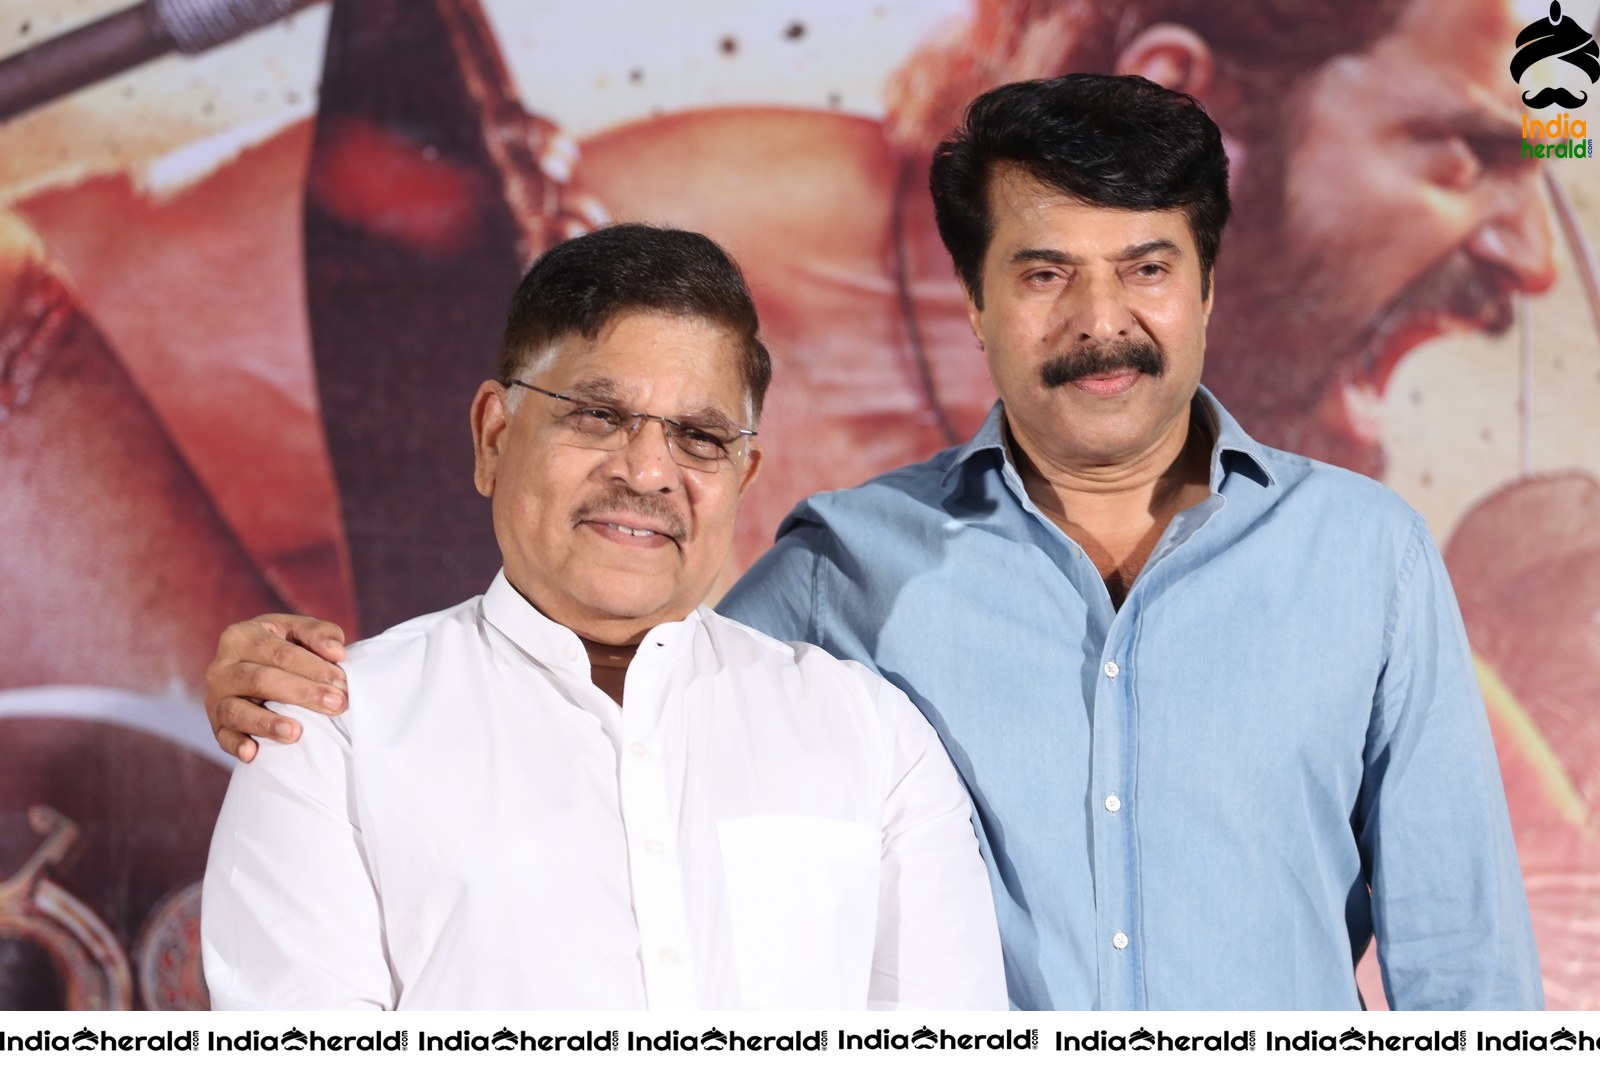 Producer Allu Aravind and Mammootty from Mamangam Movie Trailer Launch